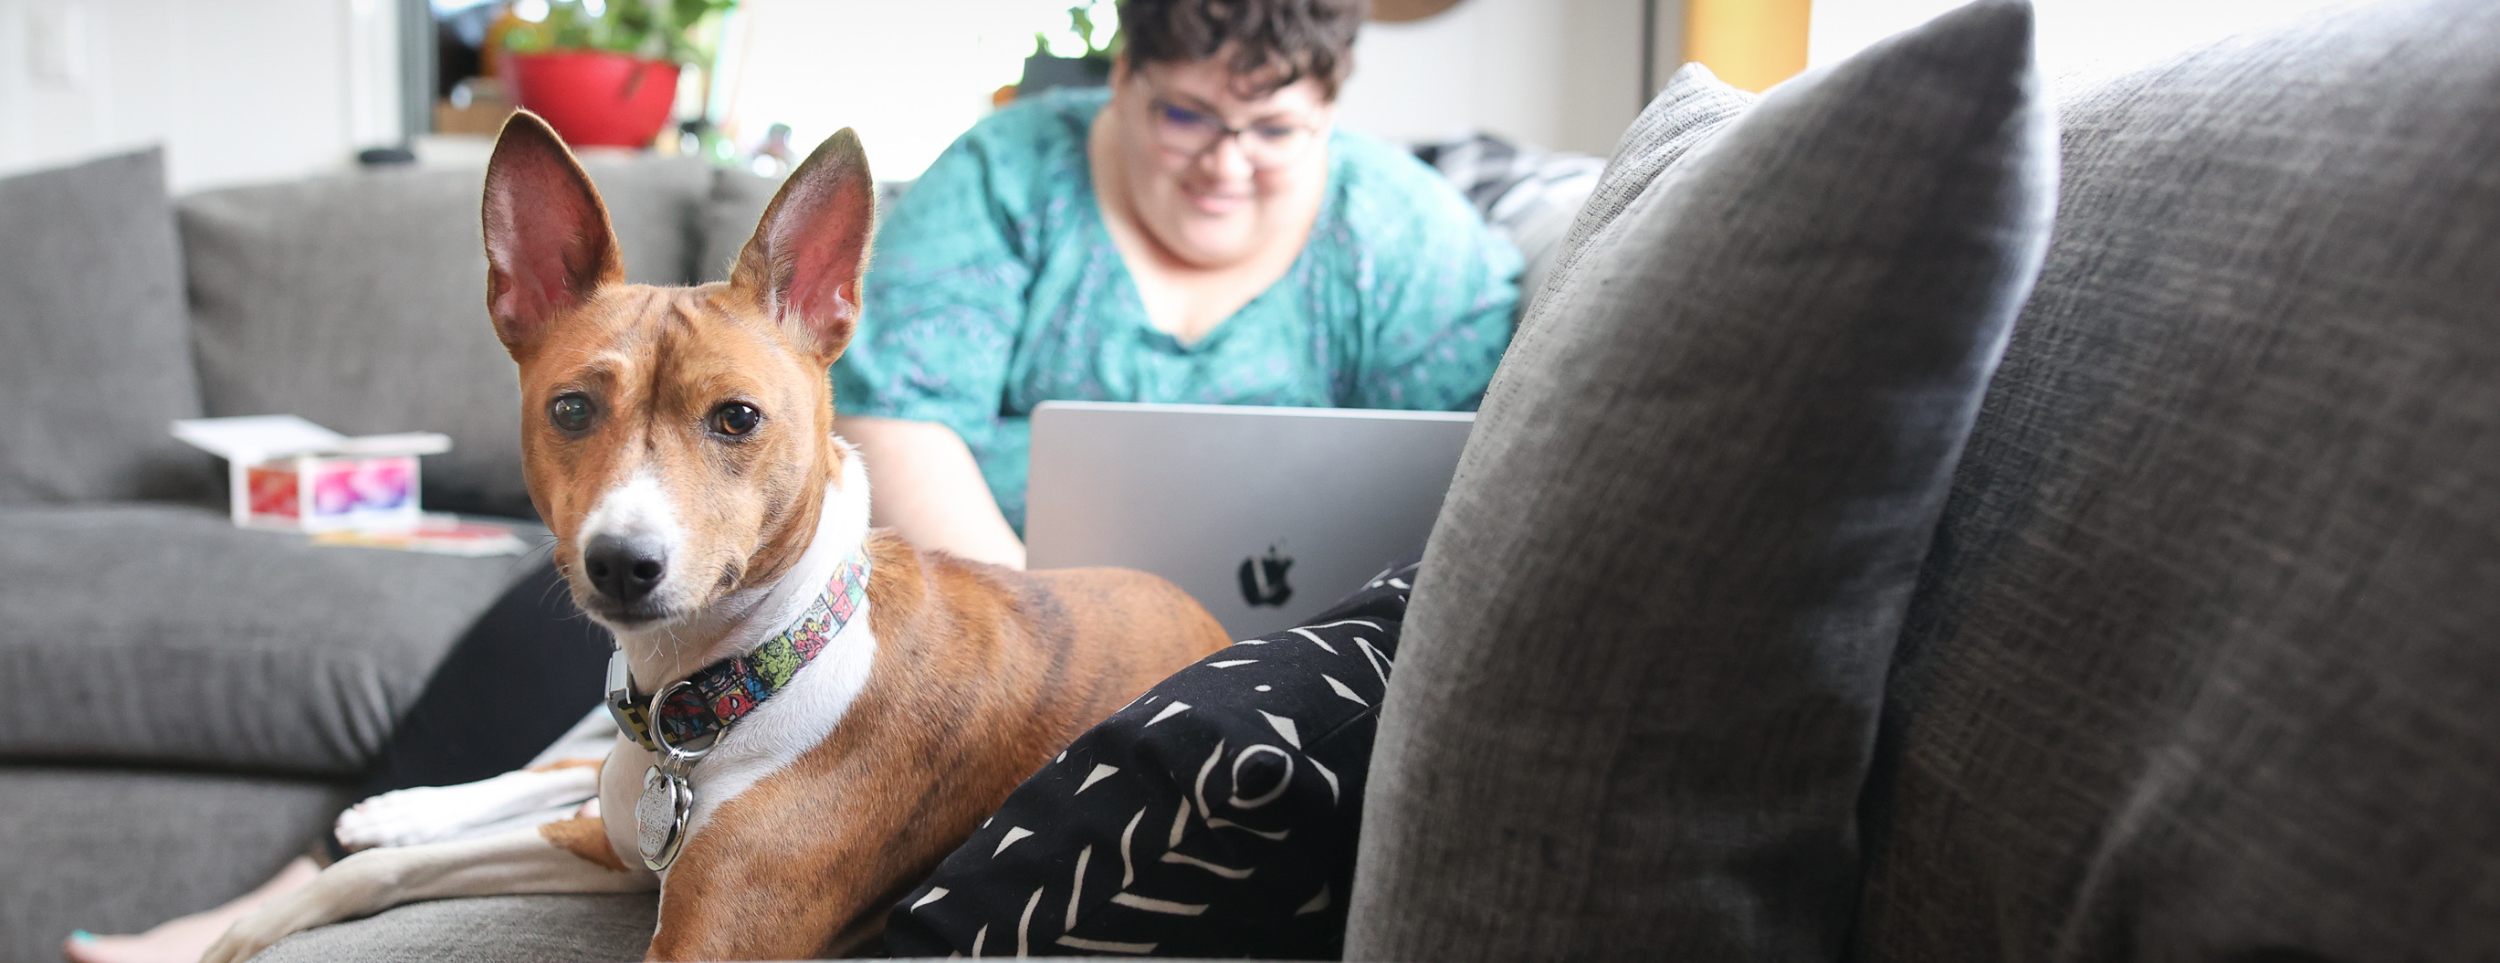 Image of Alexis and her dog on the sofa as Alexis does some wordpress maintenance